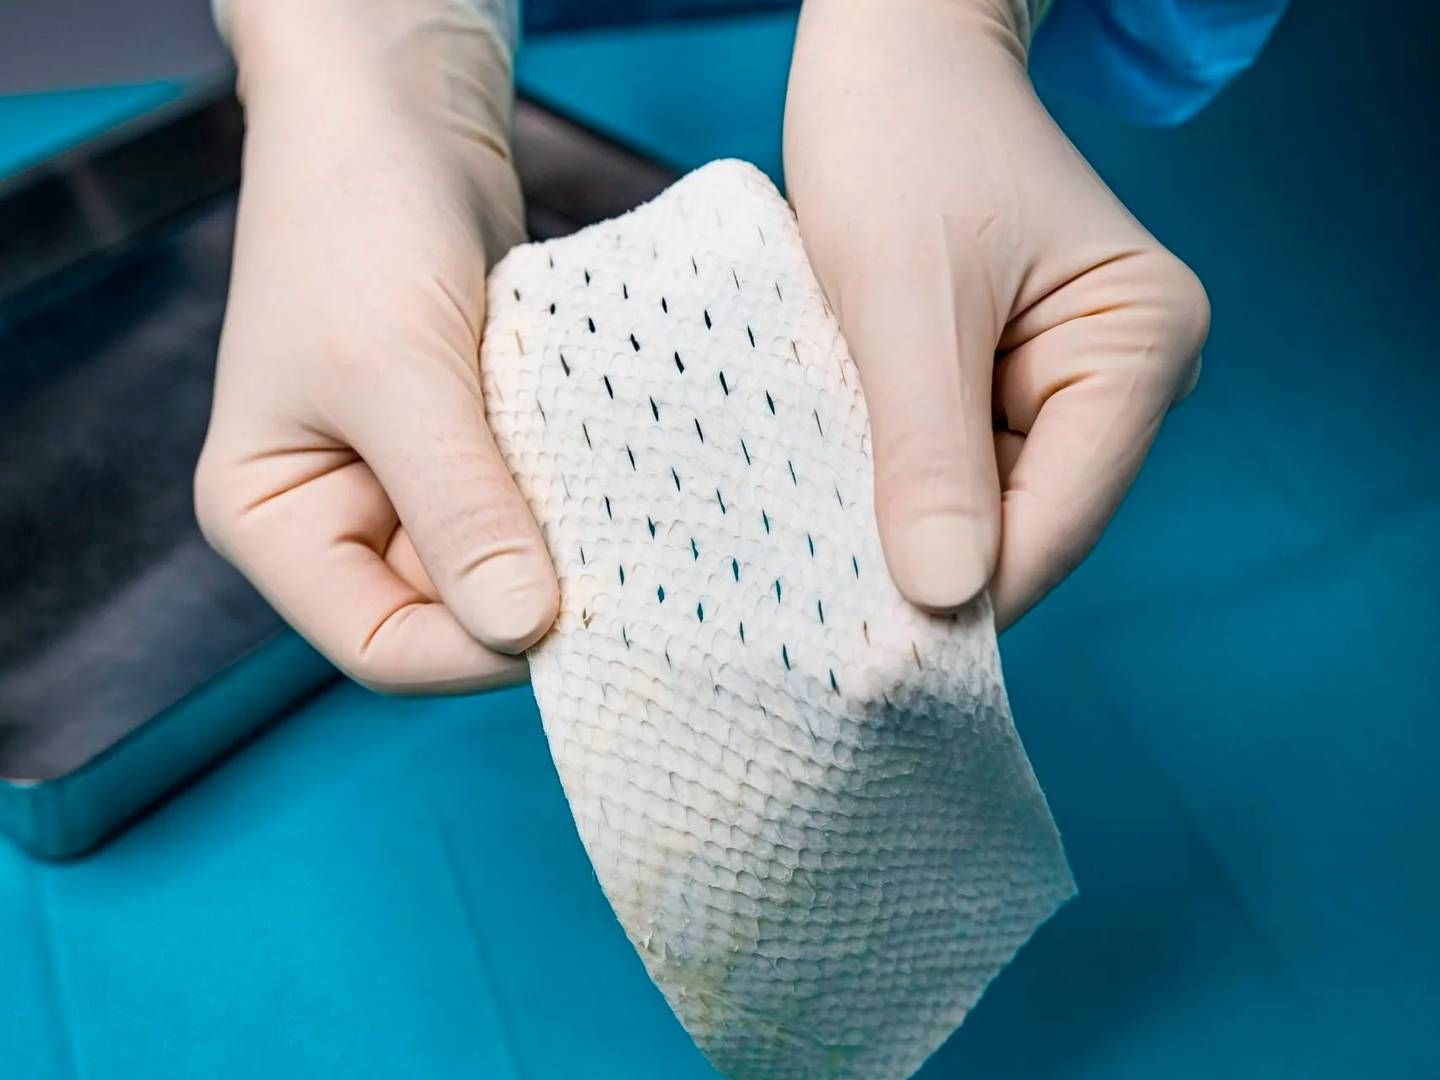 Kerecis develops fish skin products for the treatment of chronic wounds, surgical wounds, burns and other wounds that have difficulty healing. | Photo: Kerecis / Pr